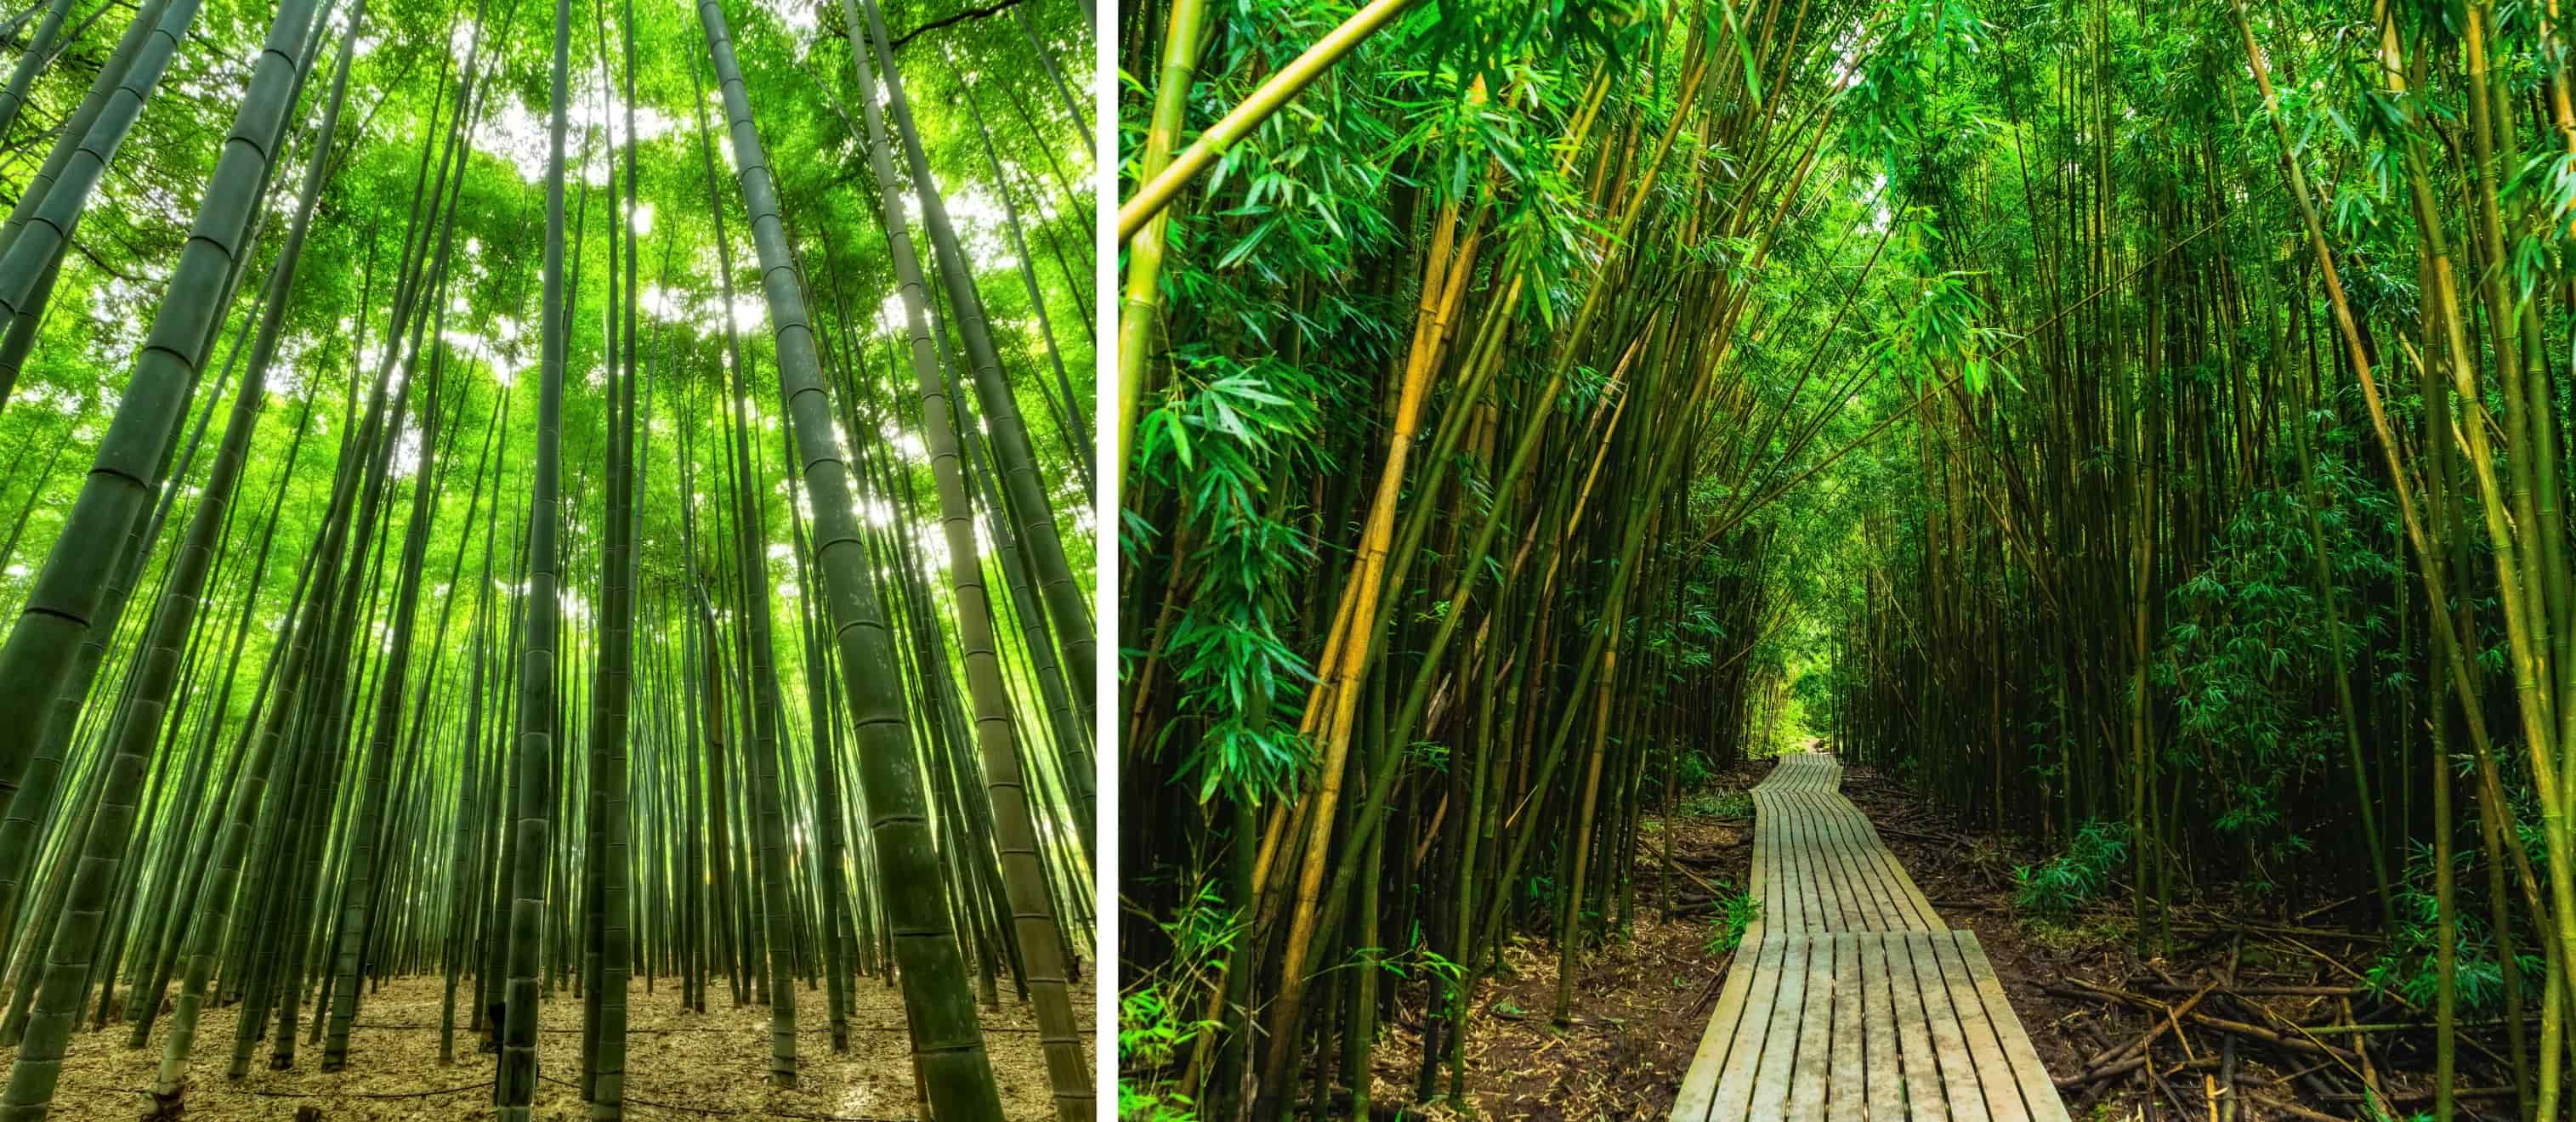 Two side-by-side images of a bamboo forest